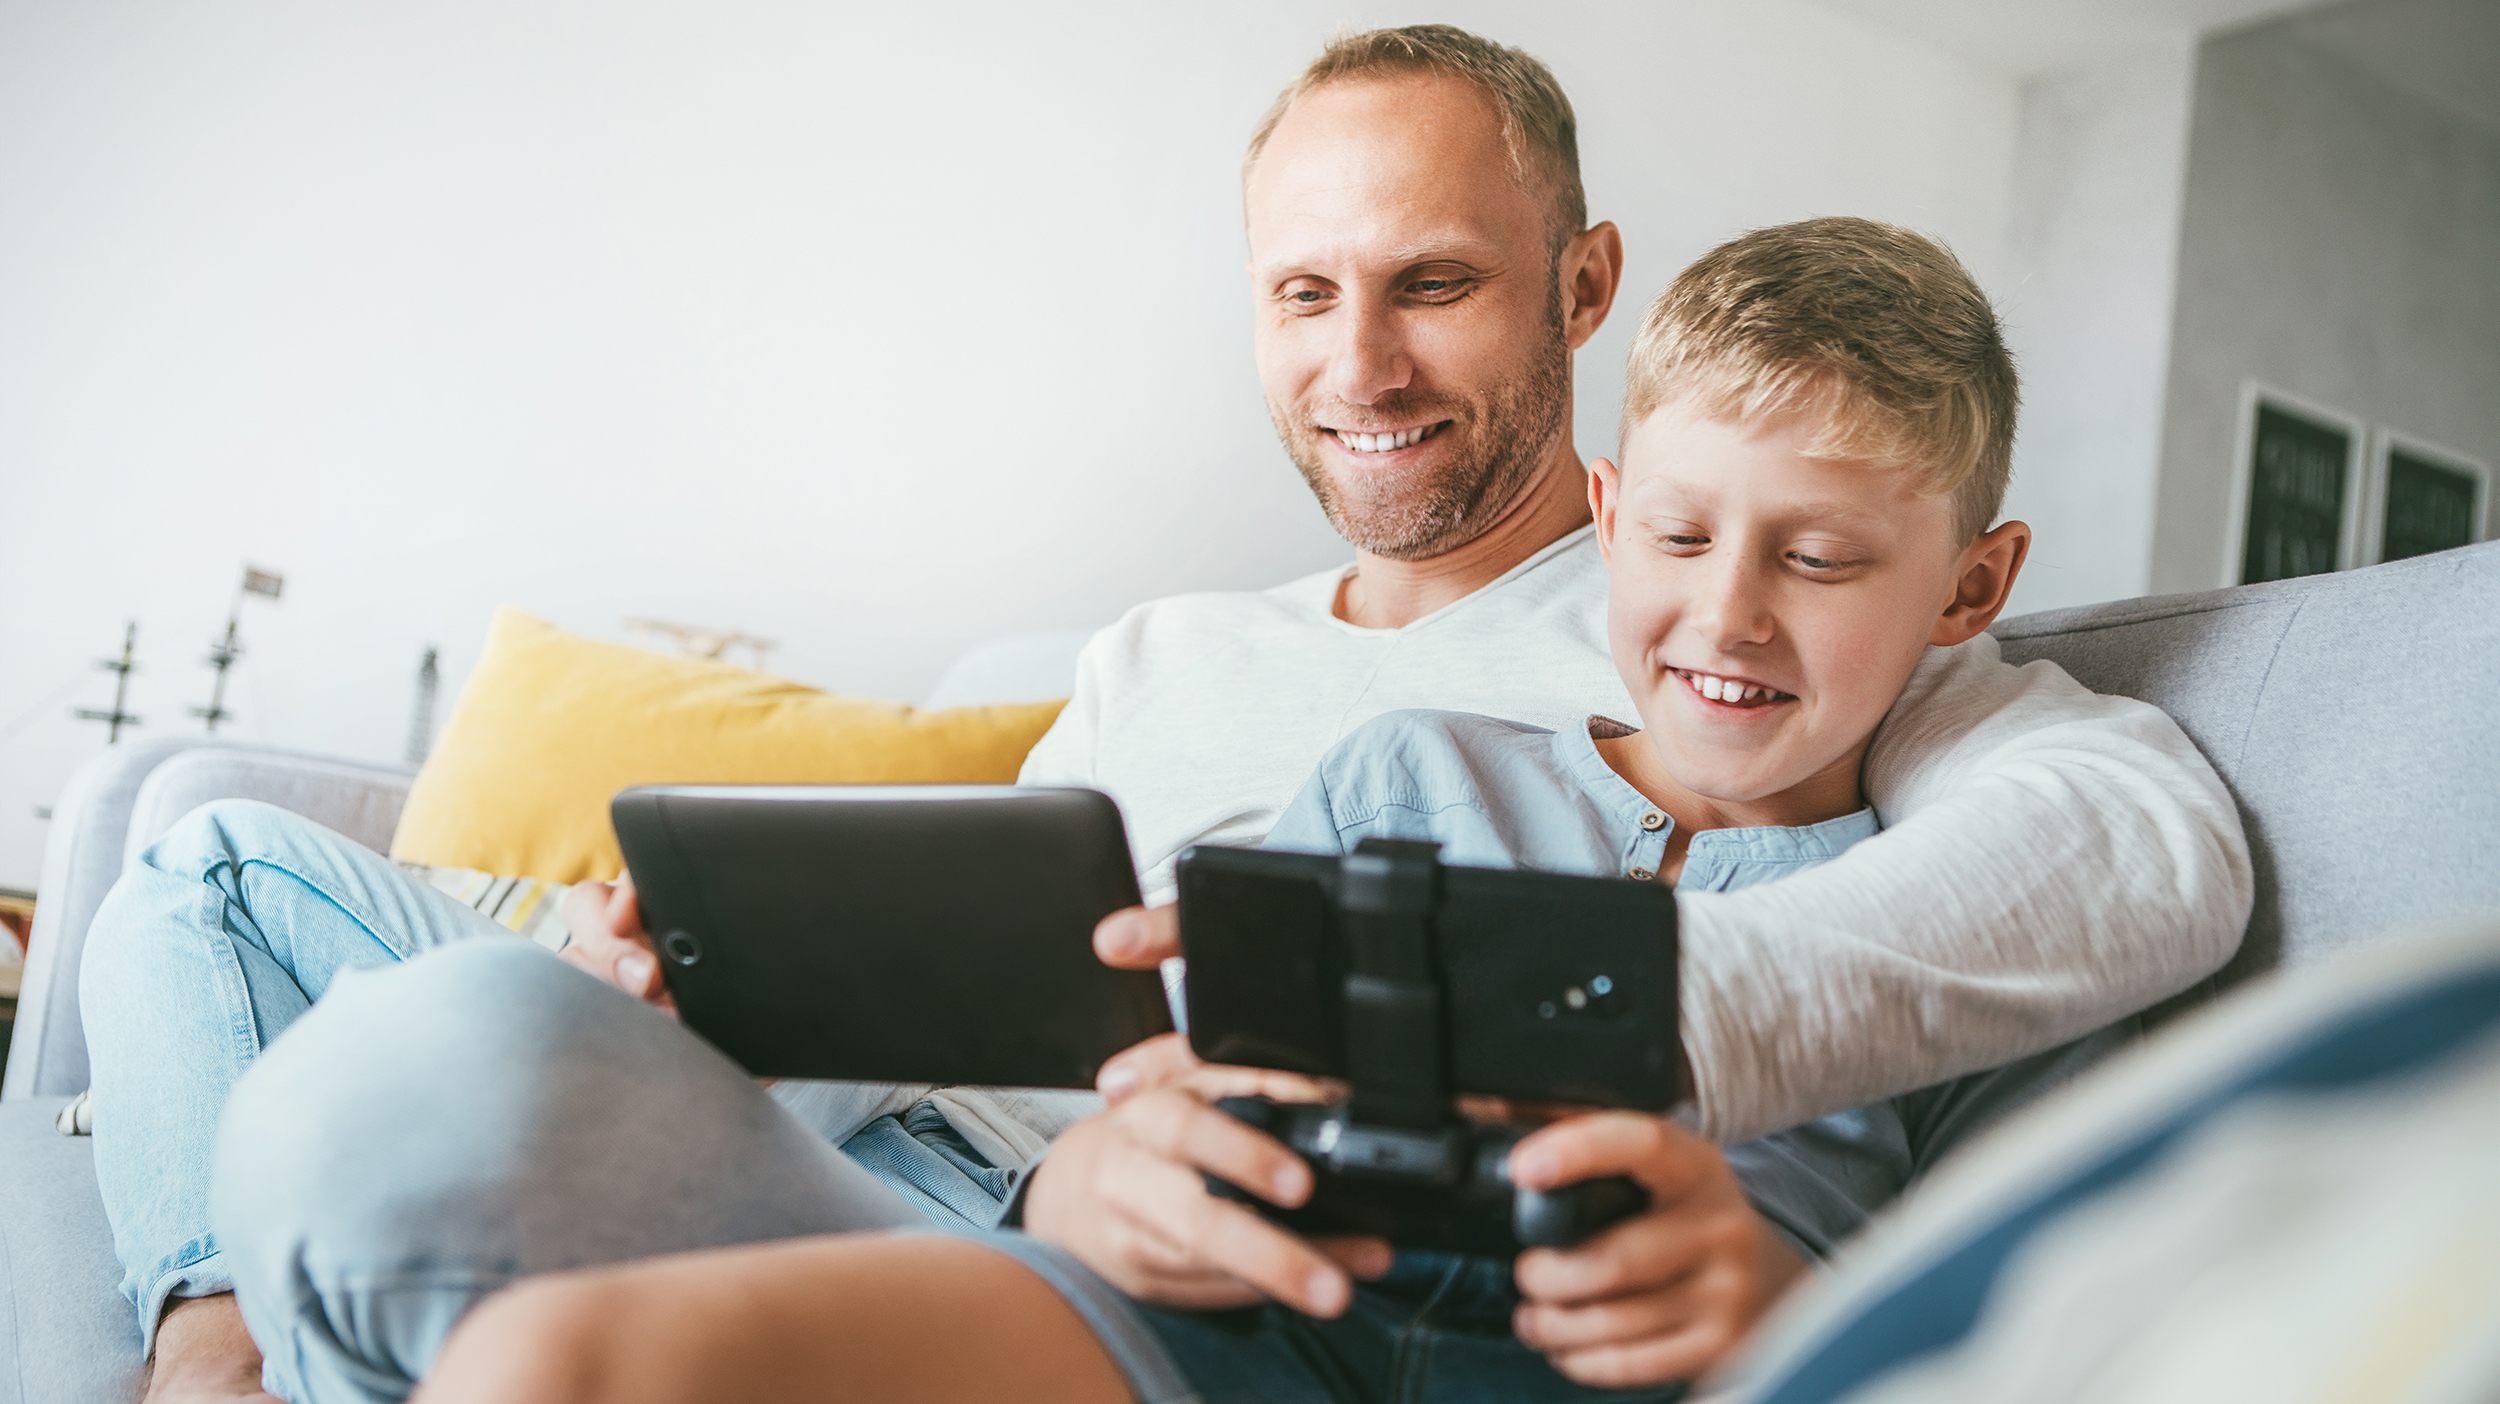 cool gadgets for father's day